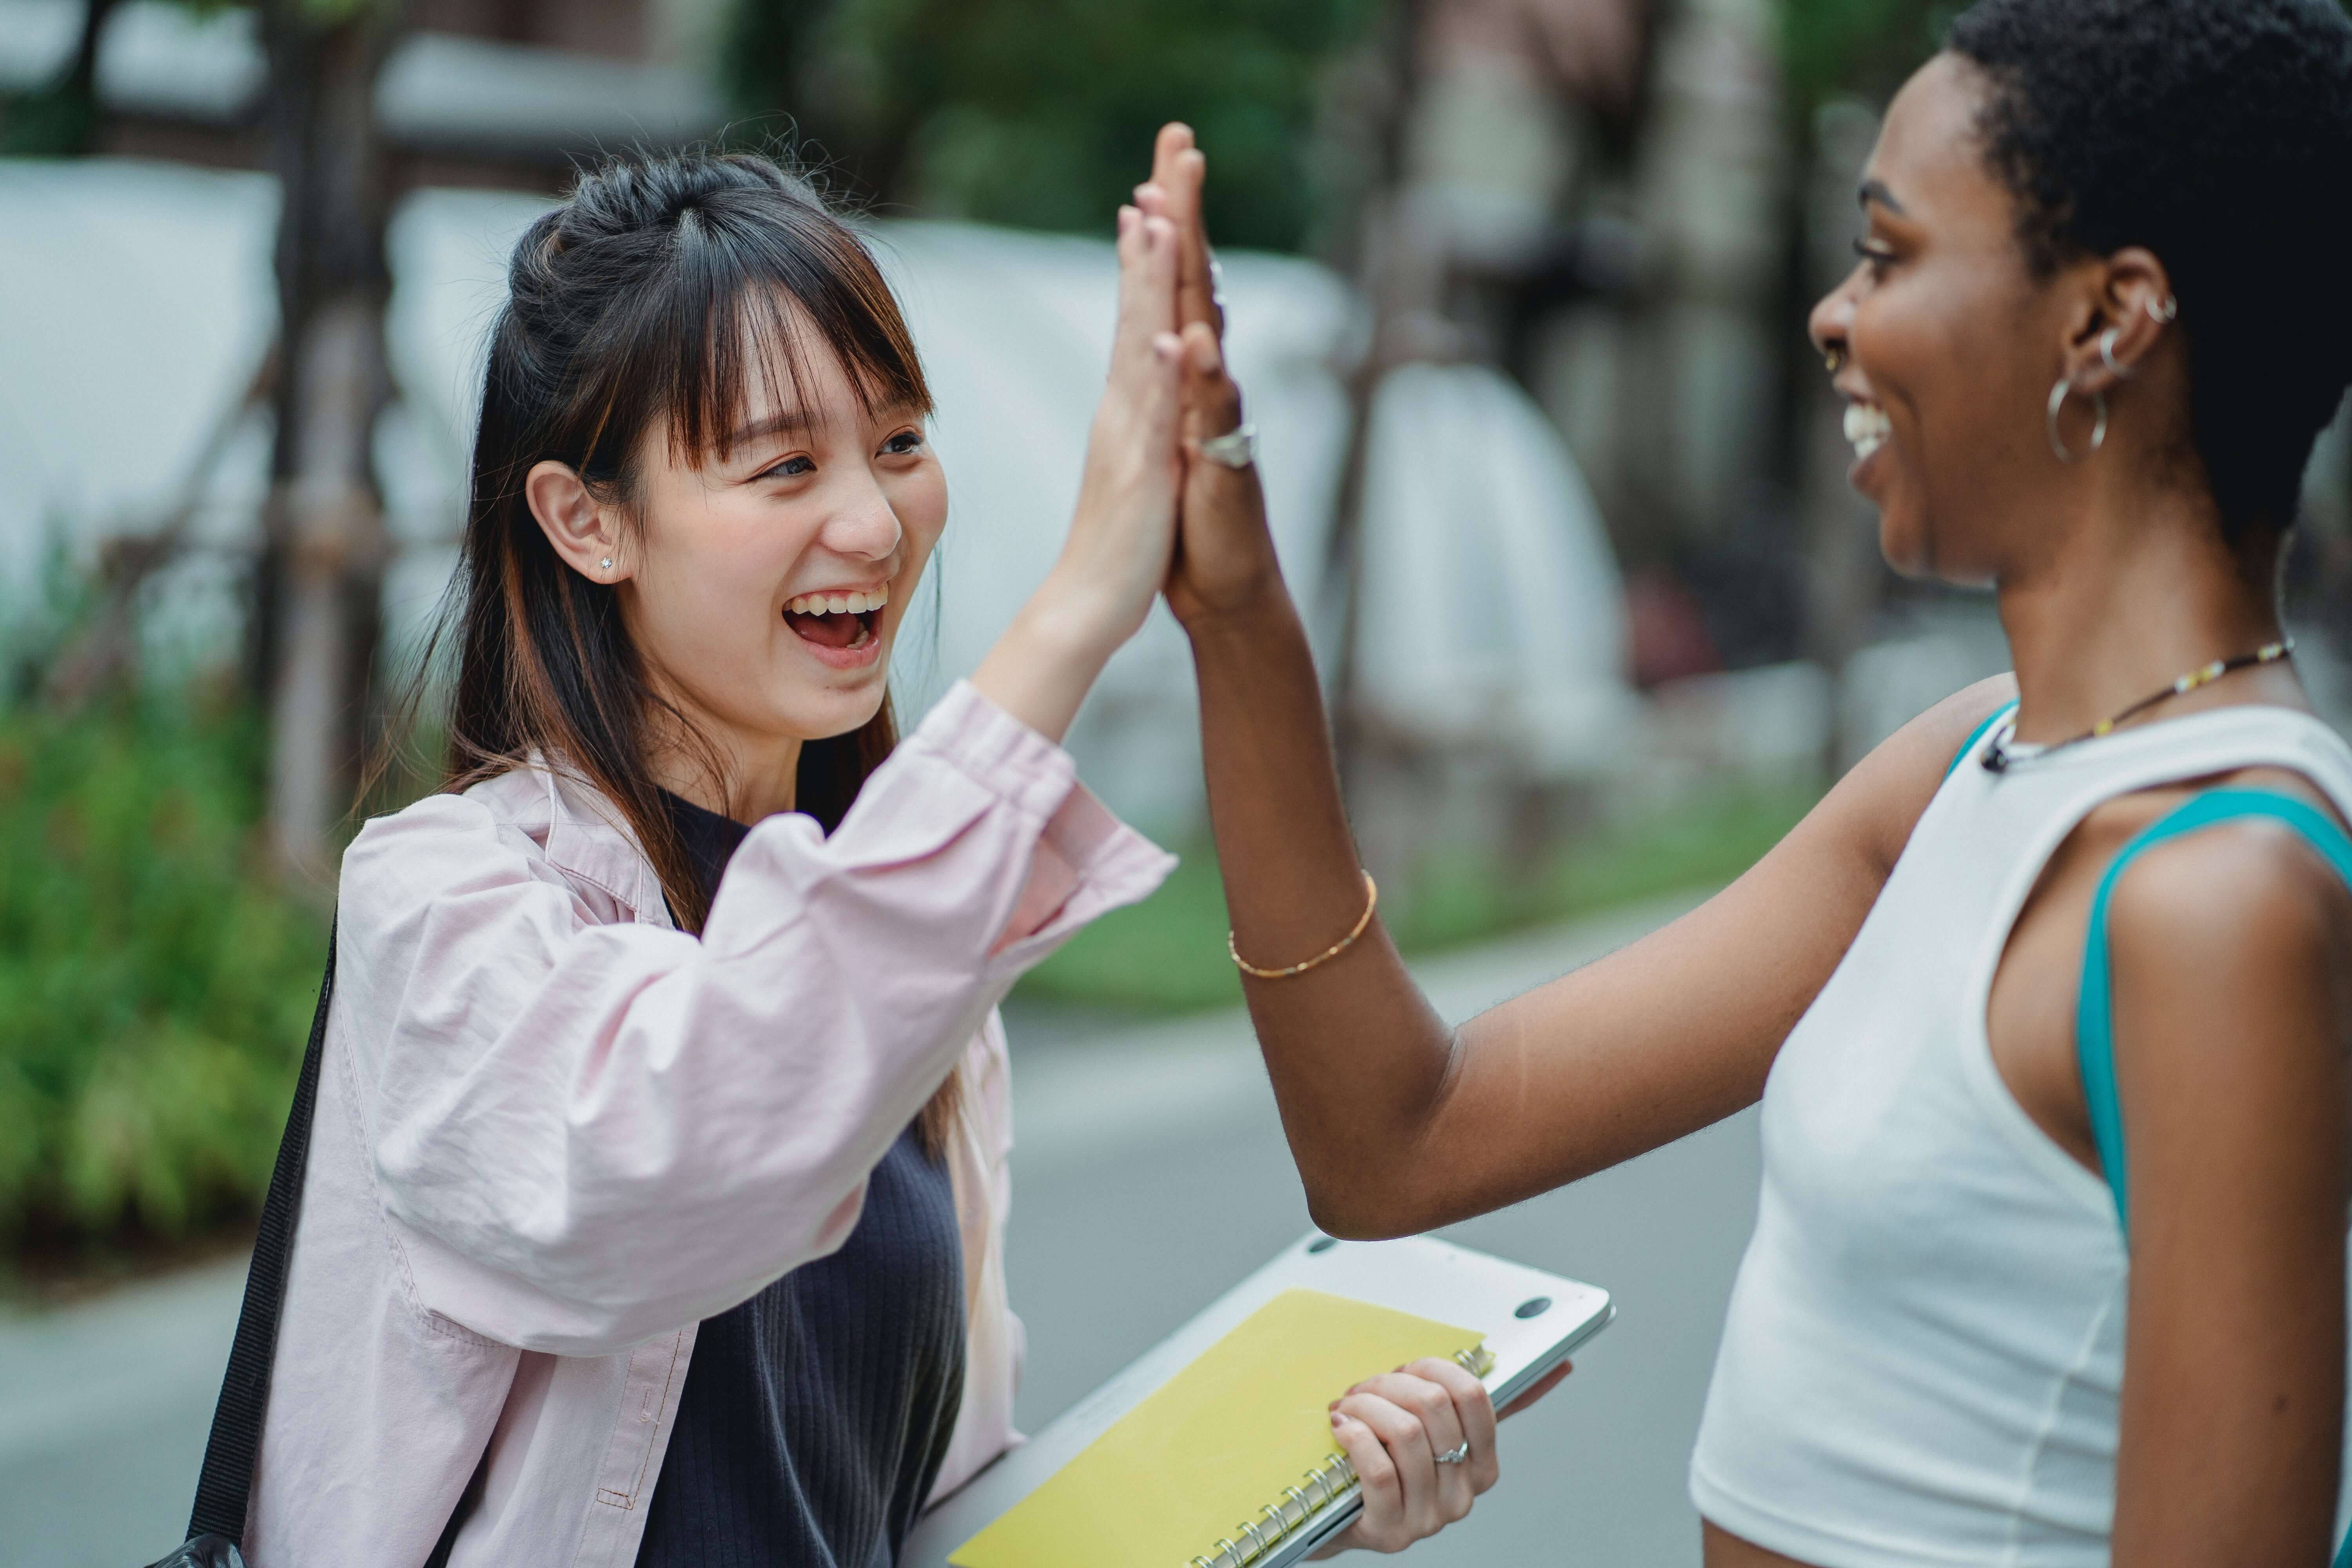 Two woman giving each other a high five is a way to say hello in english.